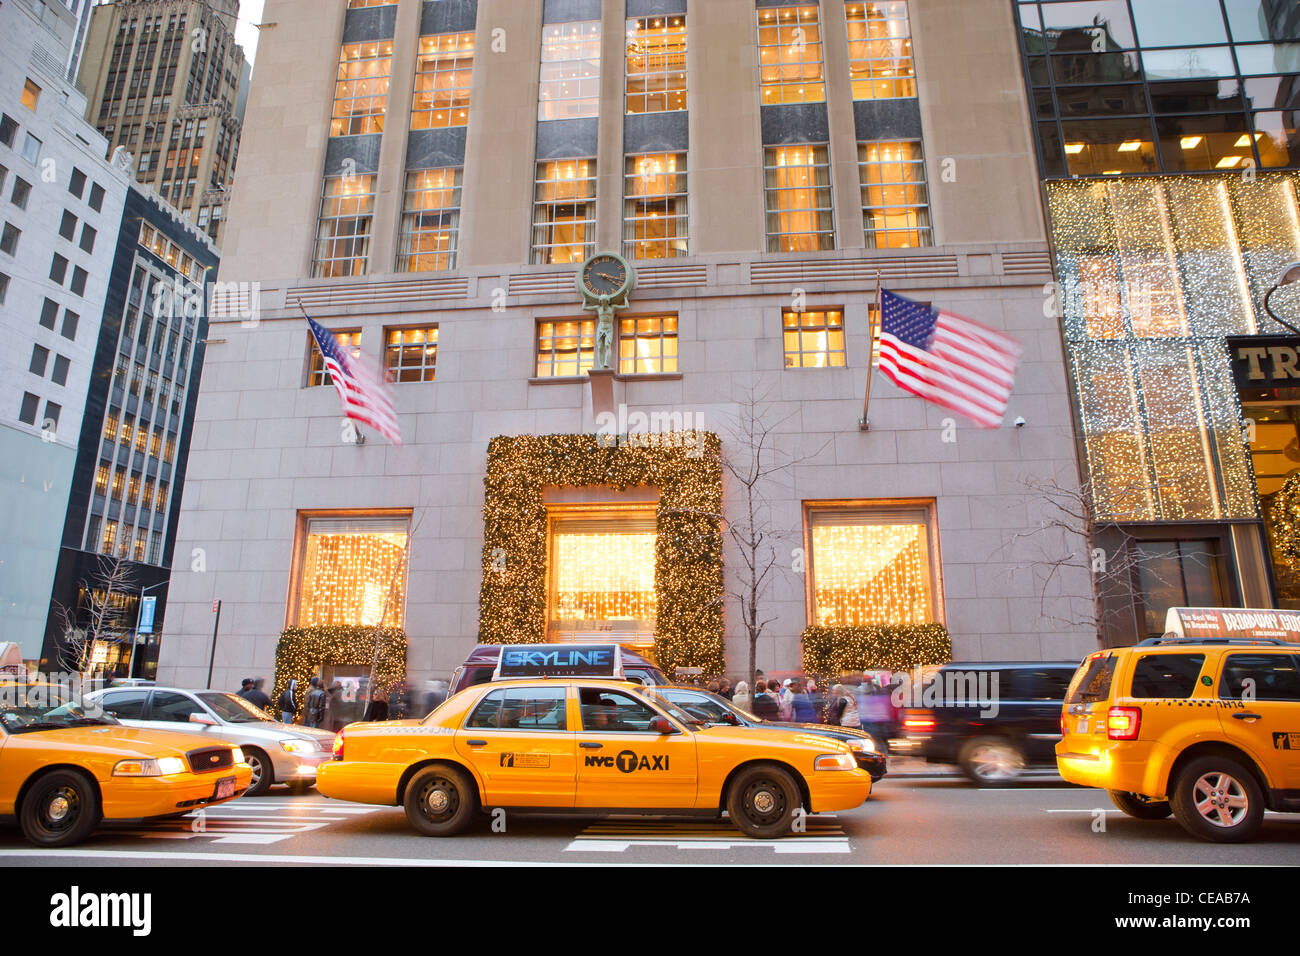 Tiffany 5th avenue hi-res stock photography and images - Alamy